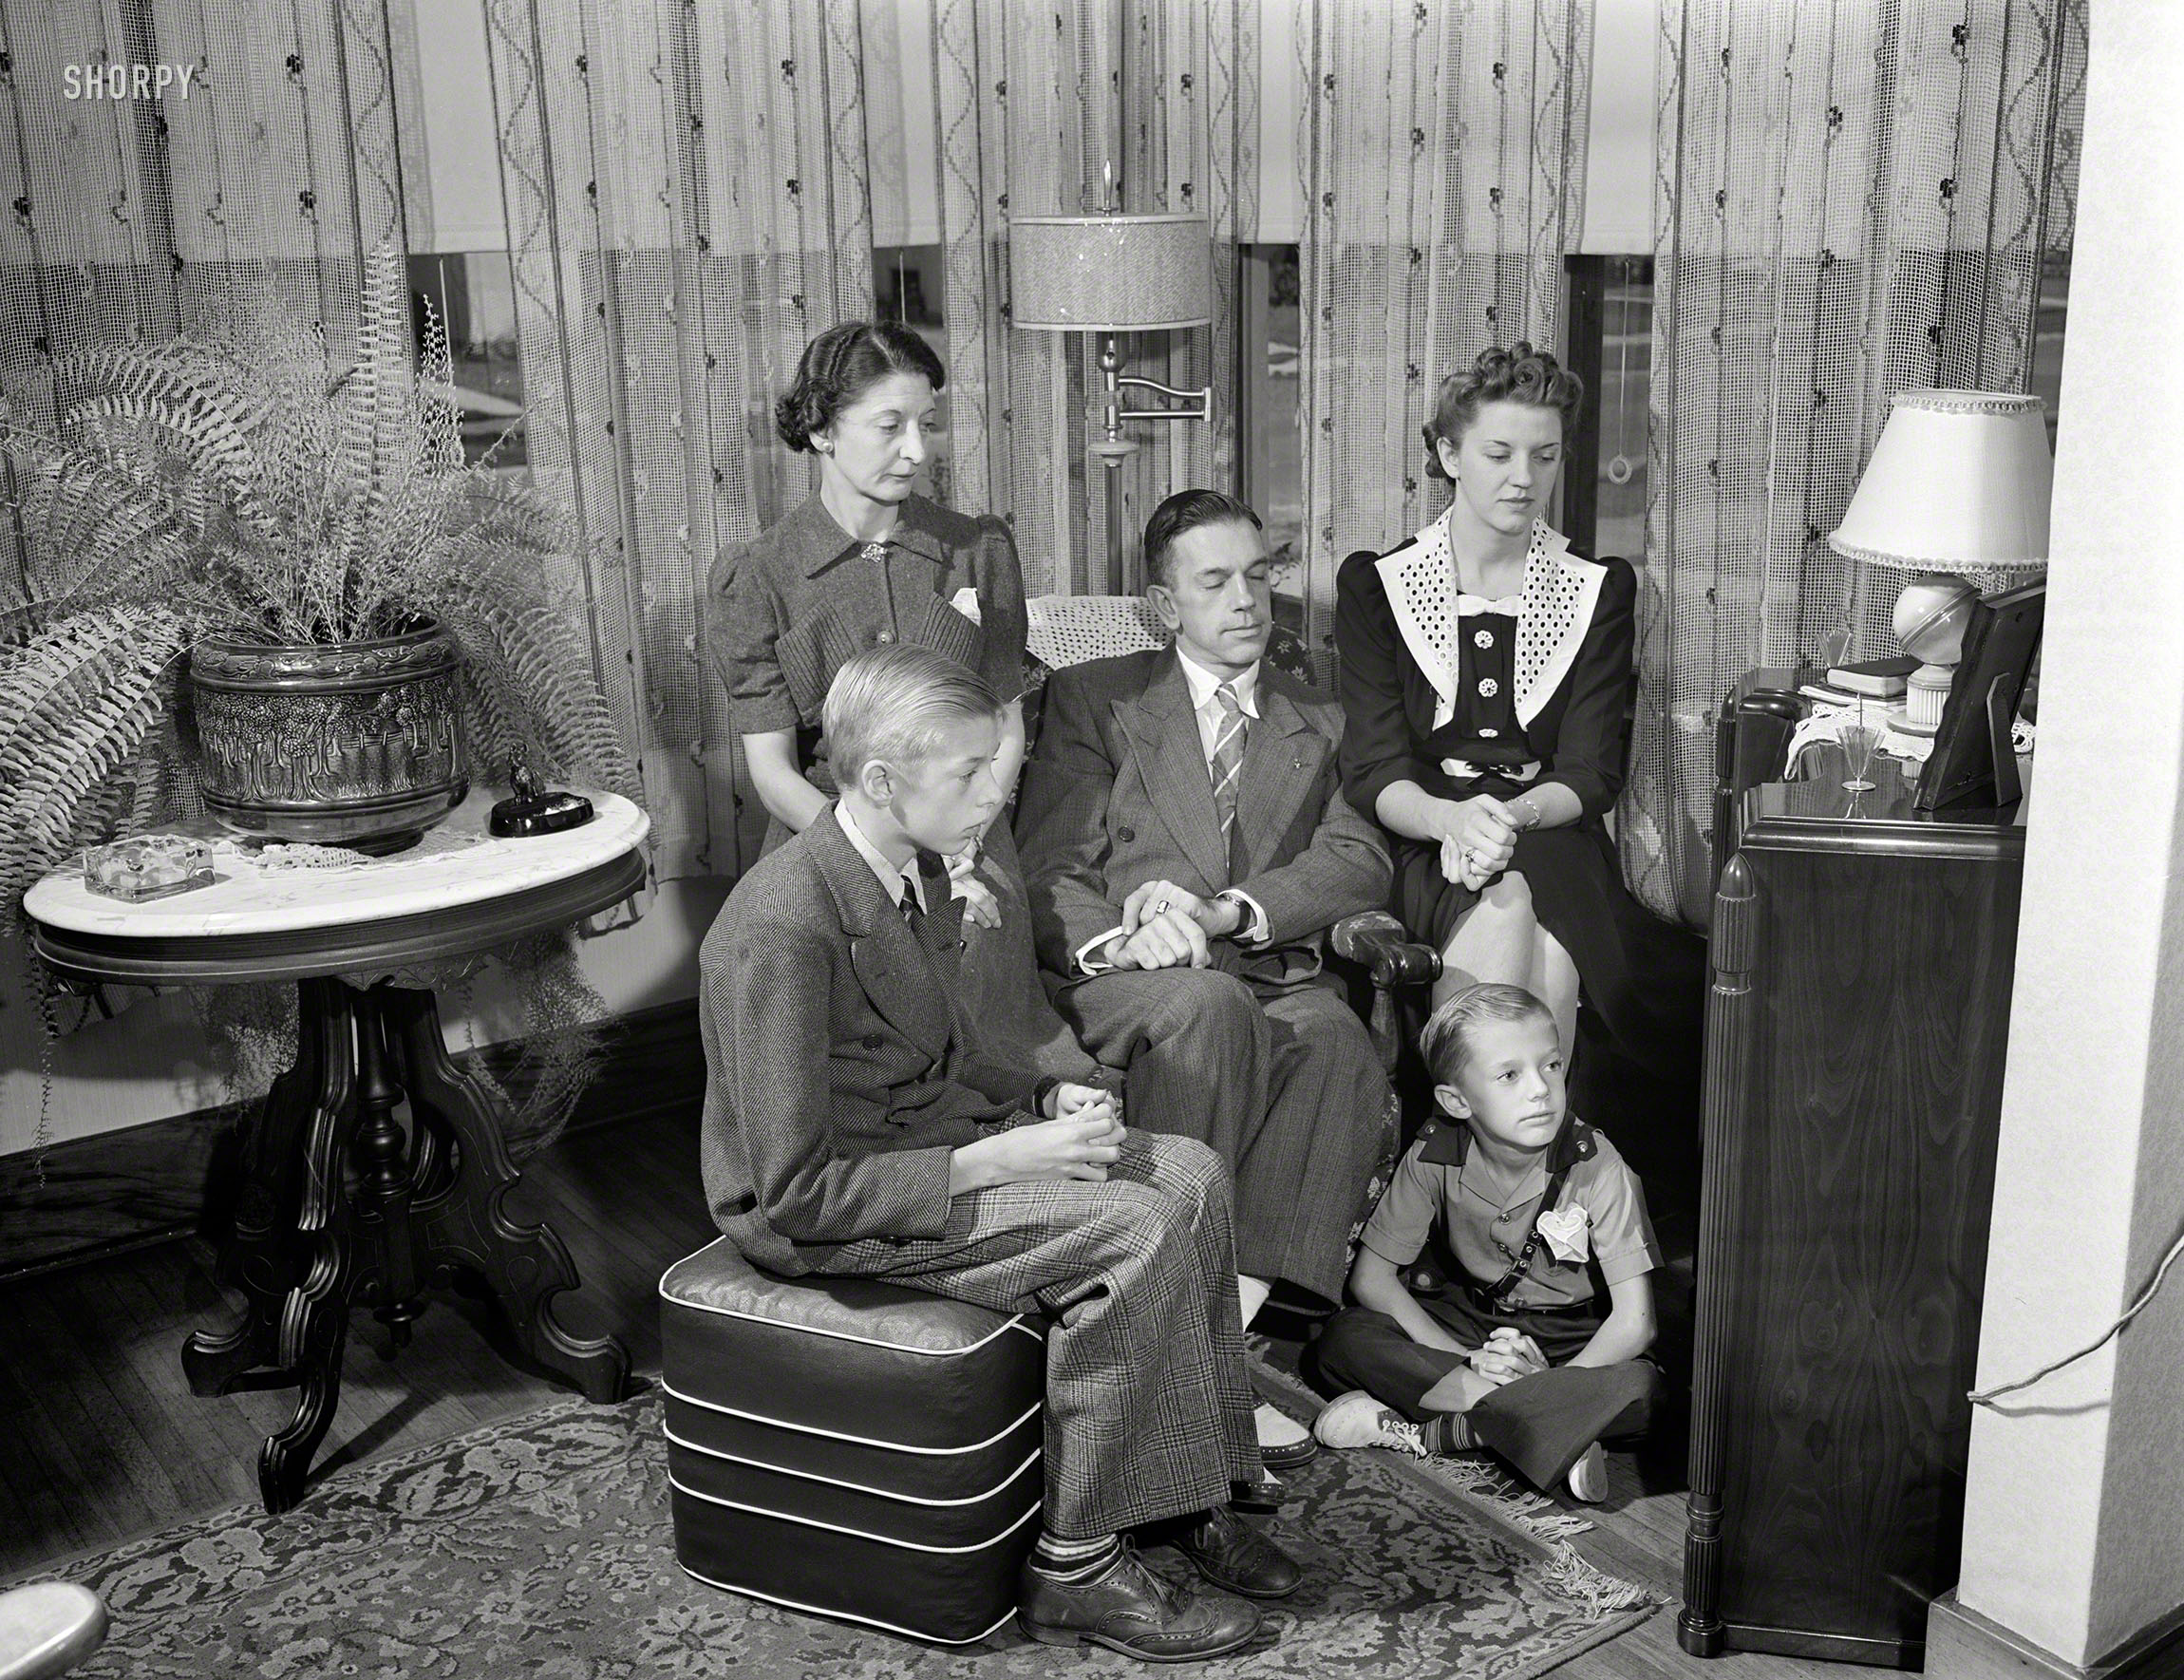 September 1942. Rochester, New York. "The Babcocks, an American family, tuning in for war news. Mr. and Mrs. Babcock with children Shirley, Howard and Earl, the youngest." Photo by Ralph Amdursky, Office of War Information. View full size.